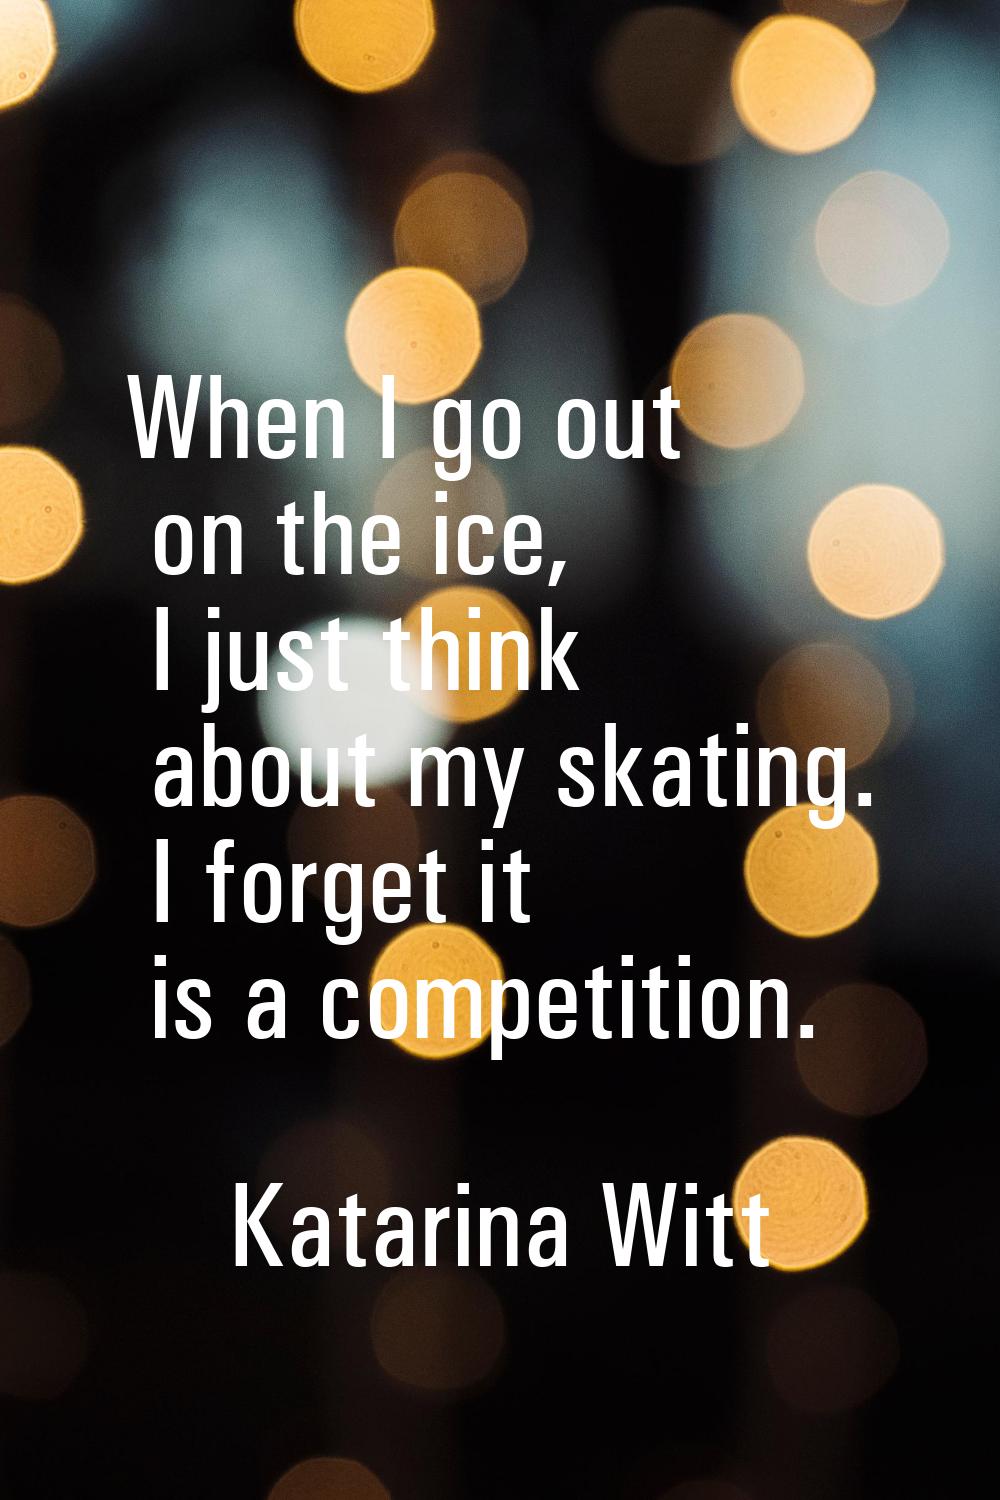 When I go out on the ice, I just think about my skating. I forget it is a competition.